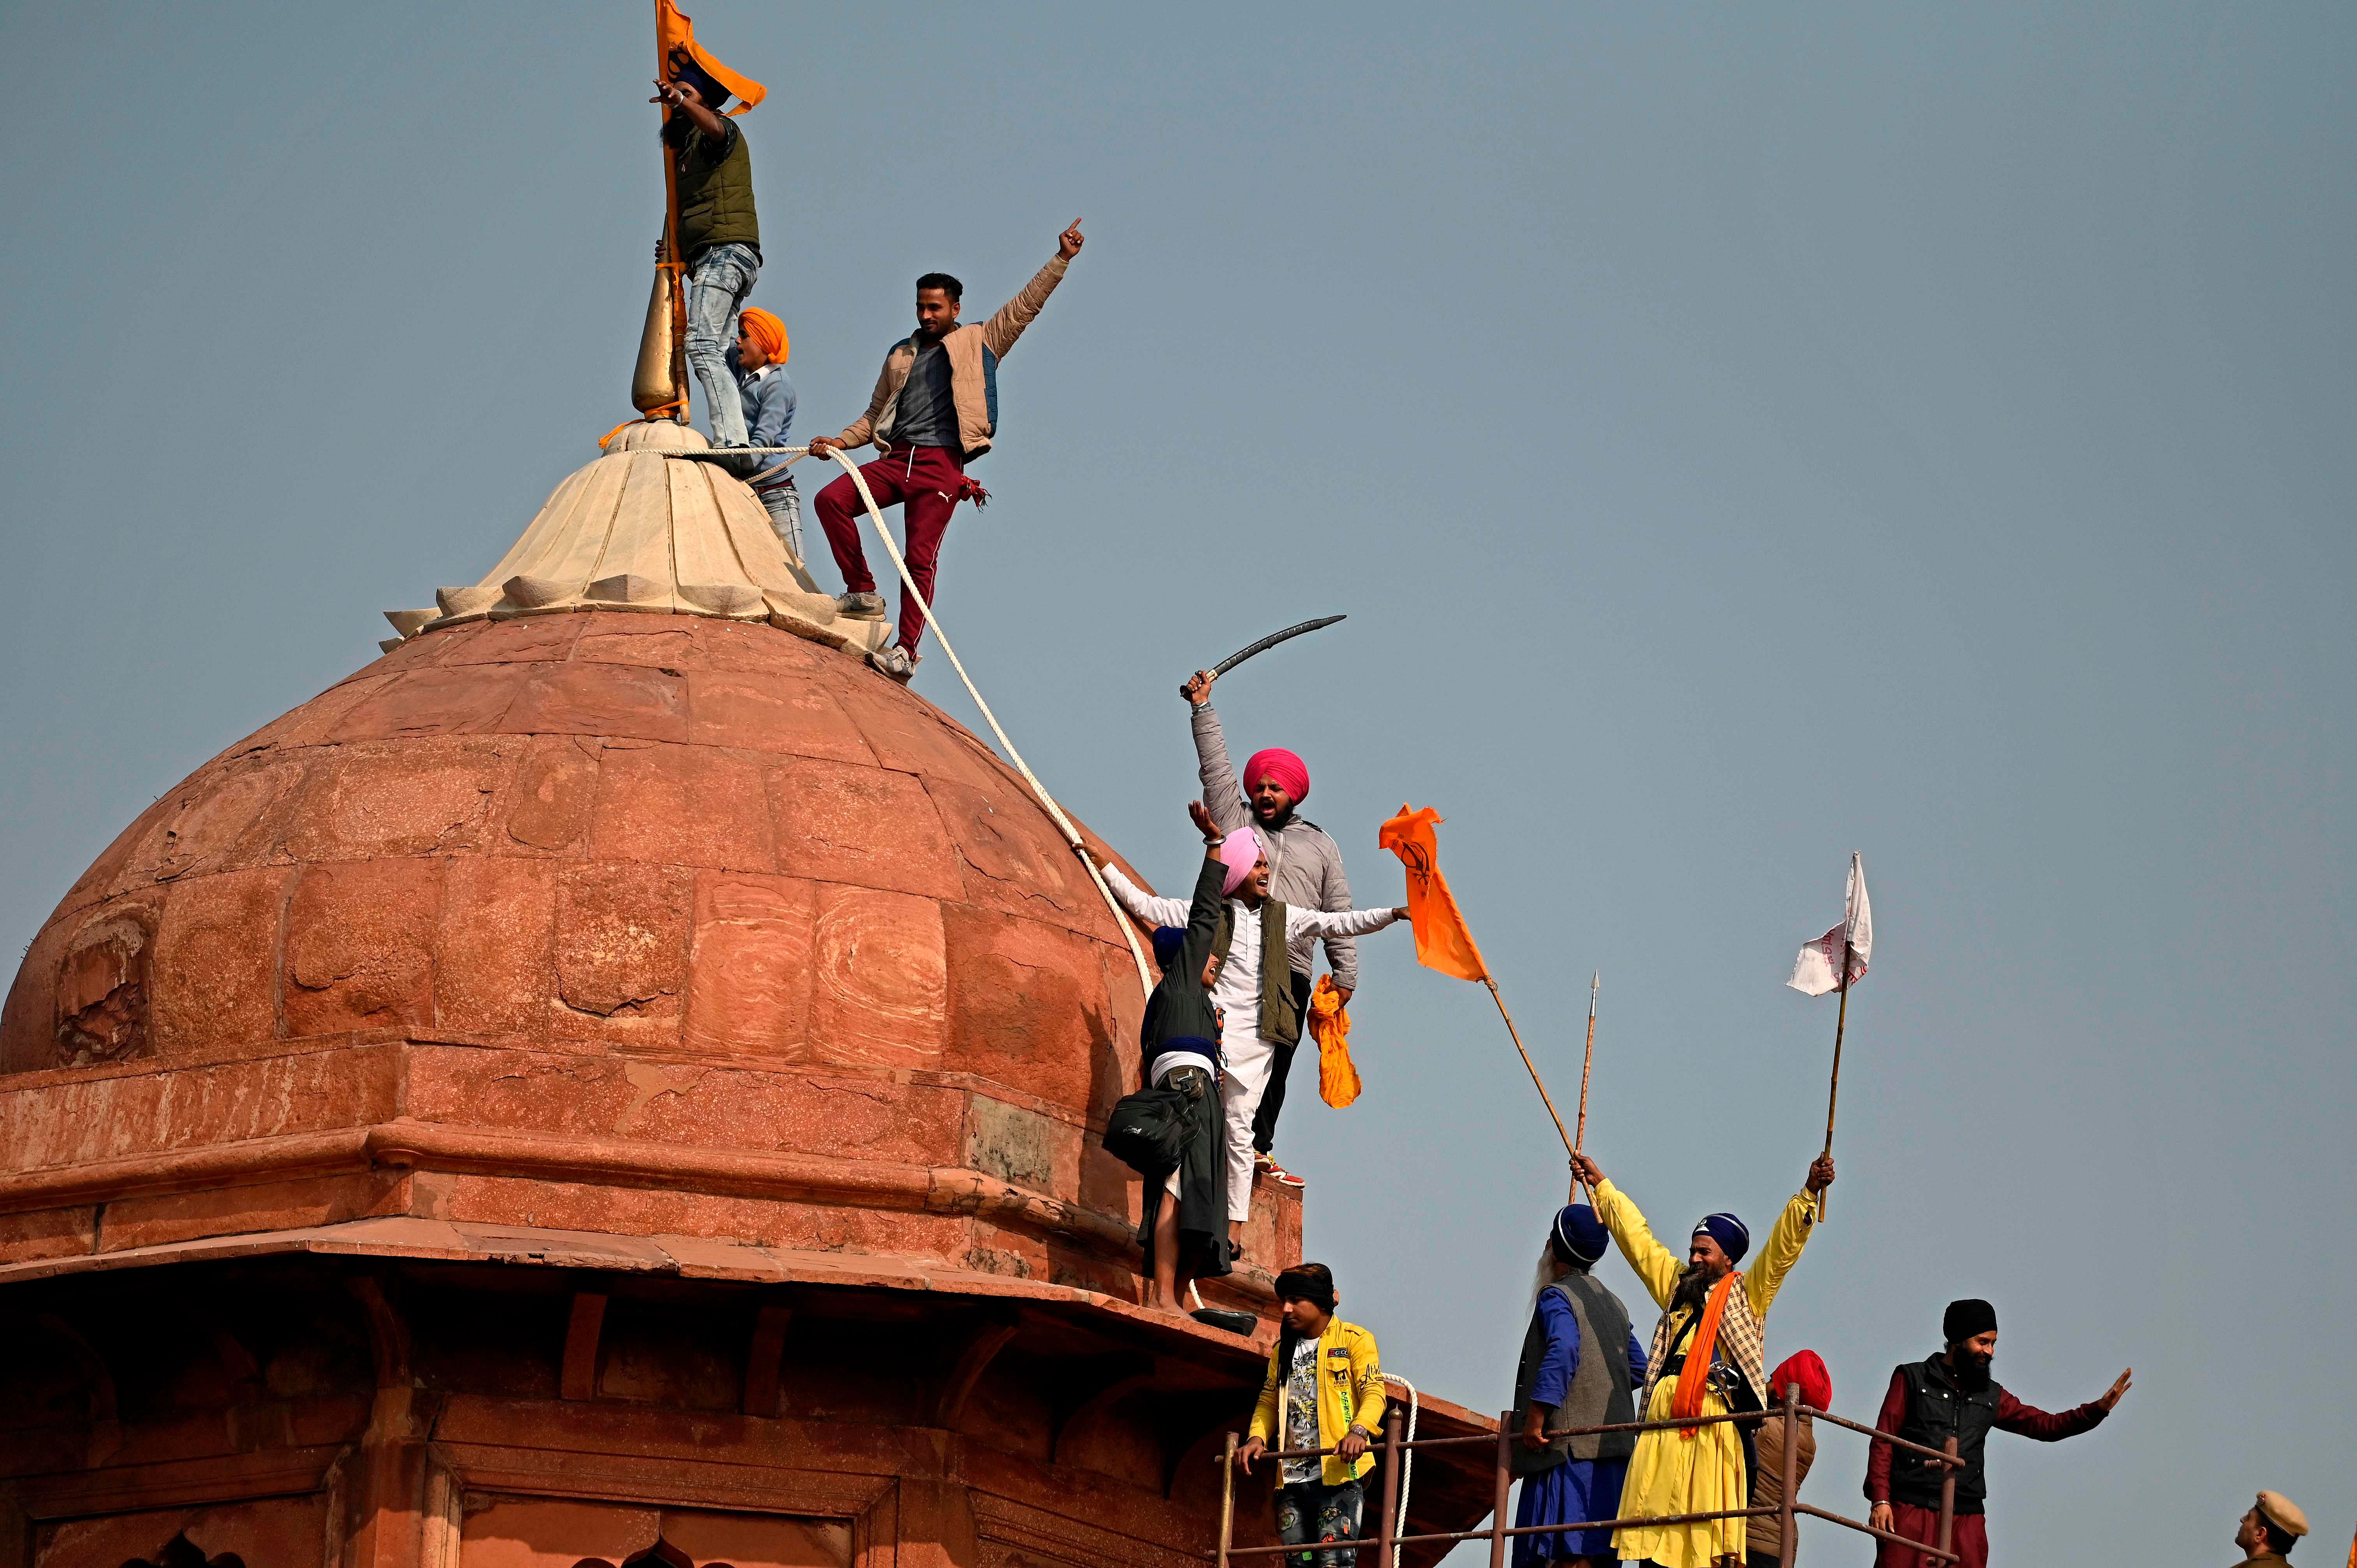 Protesters climb on a dome at the ramparts of the Red Fort as farmers continue to demonstrate against the central government's recent agricultural reforms in New Delhi. Credit: AFP Photo